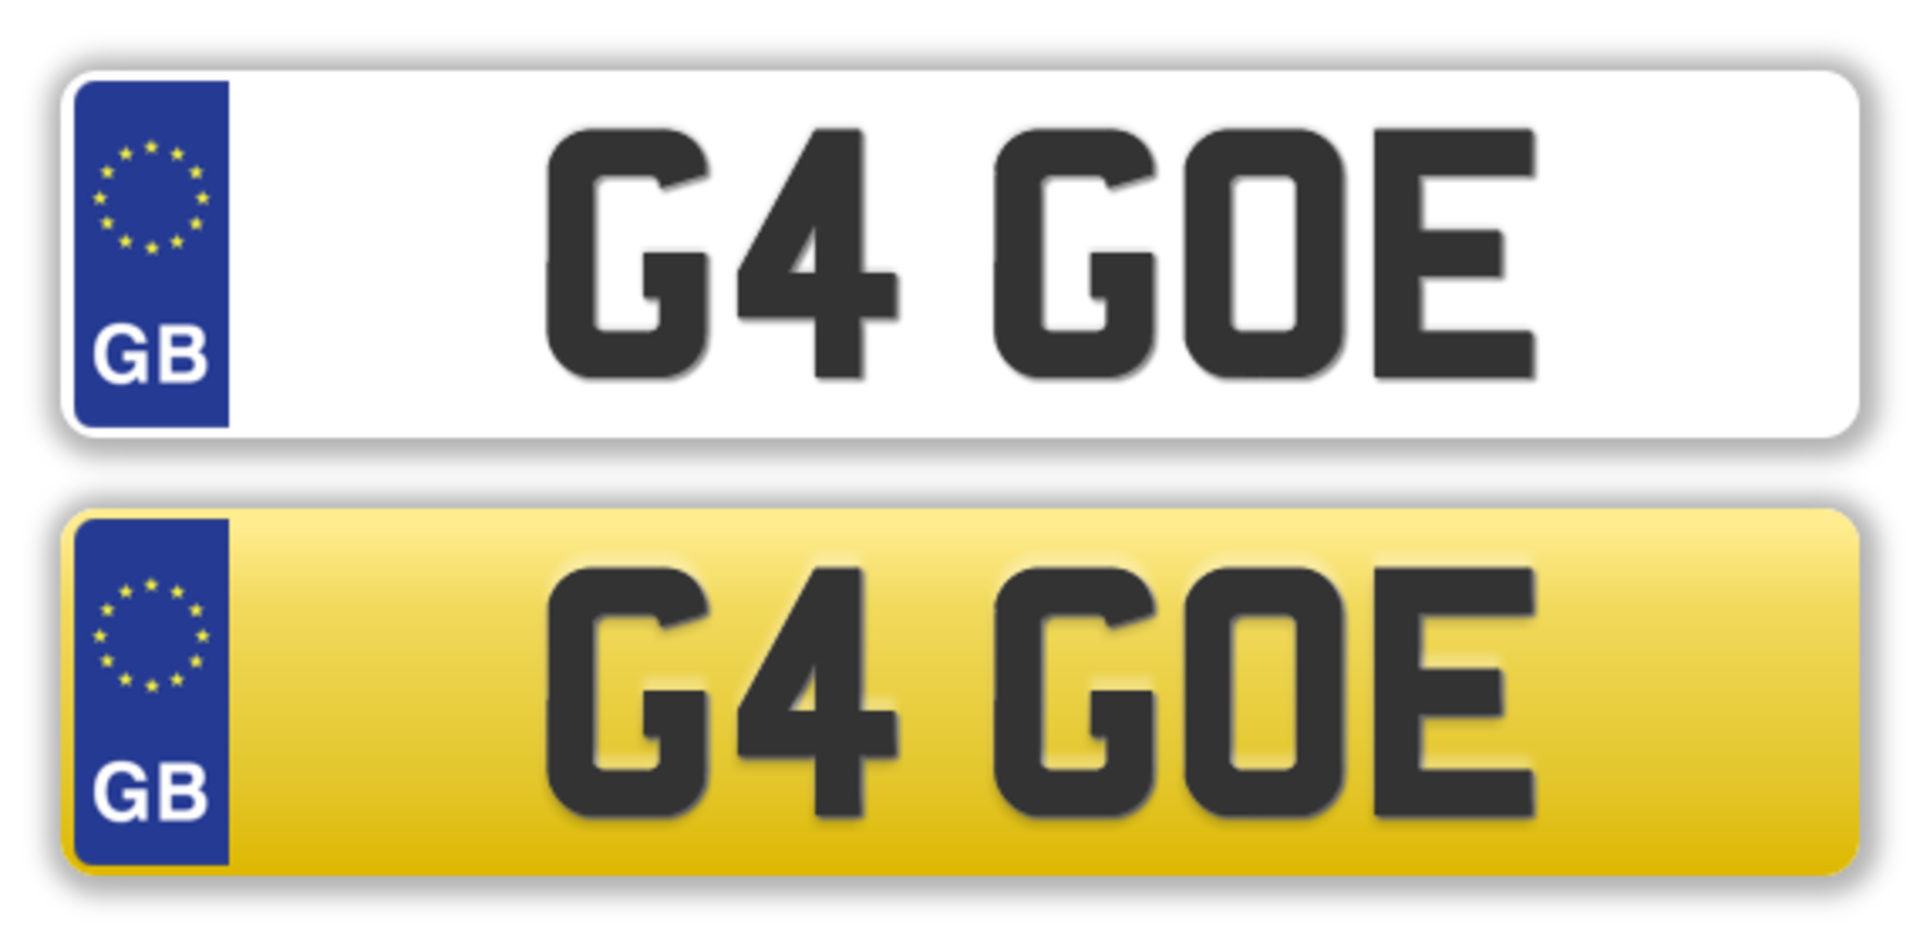 Cherished Plate - G4 GOE - No transfer fees. All registrations on retention and ready to transfer.